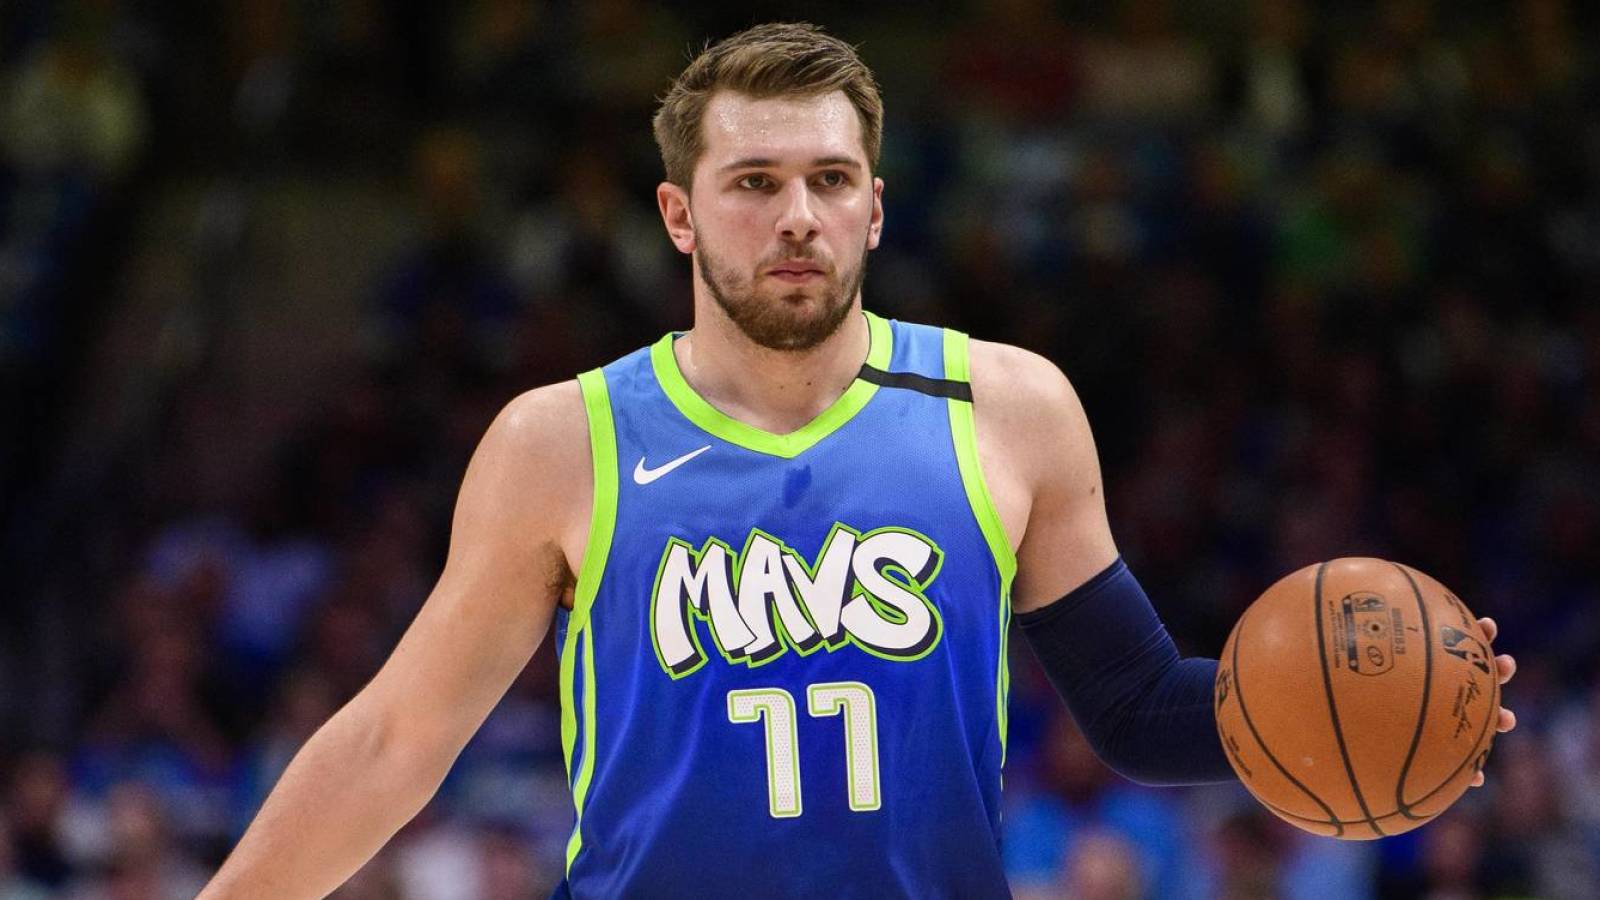 Watch: Luka Doncic rips his jersey in frustration after missing